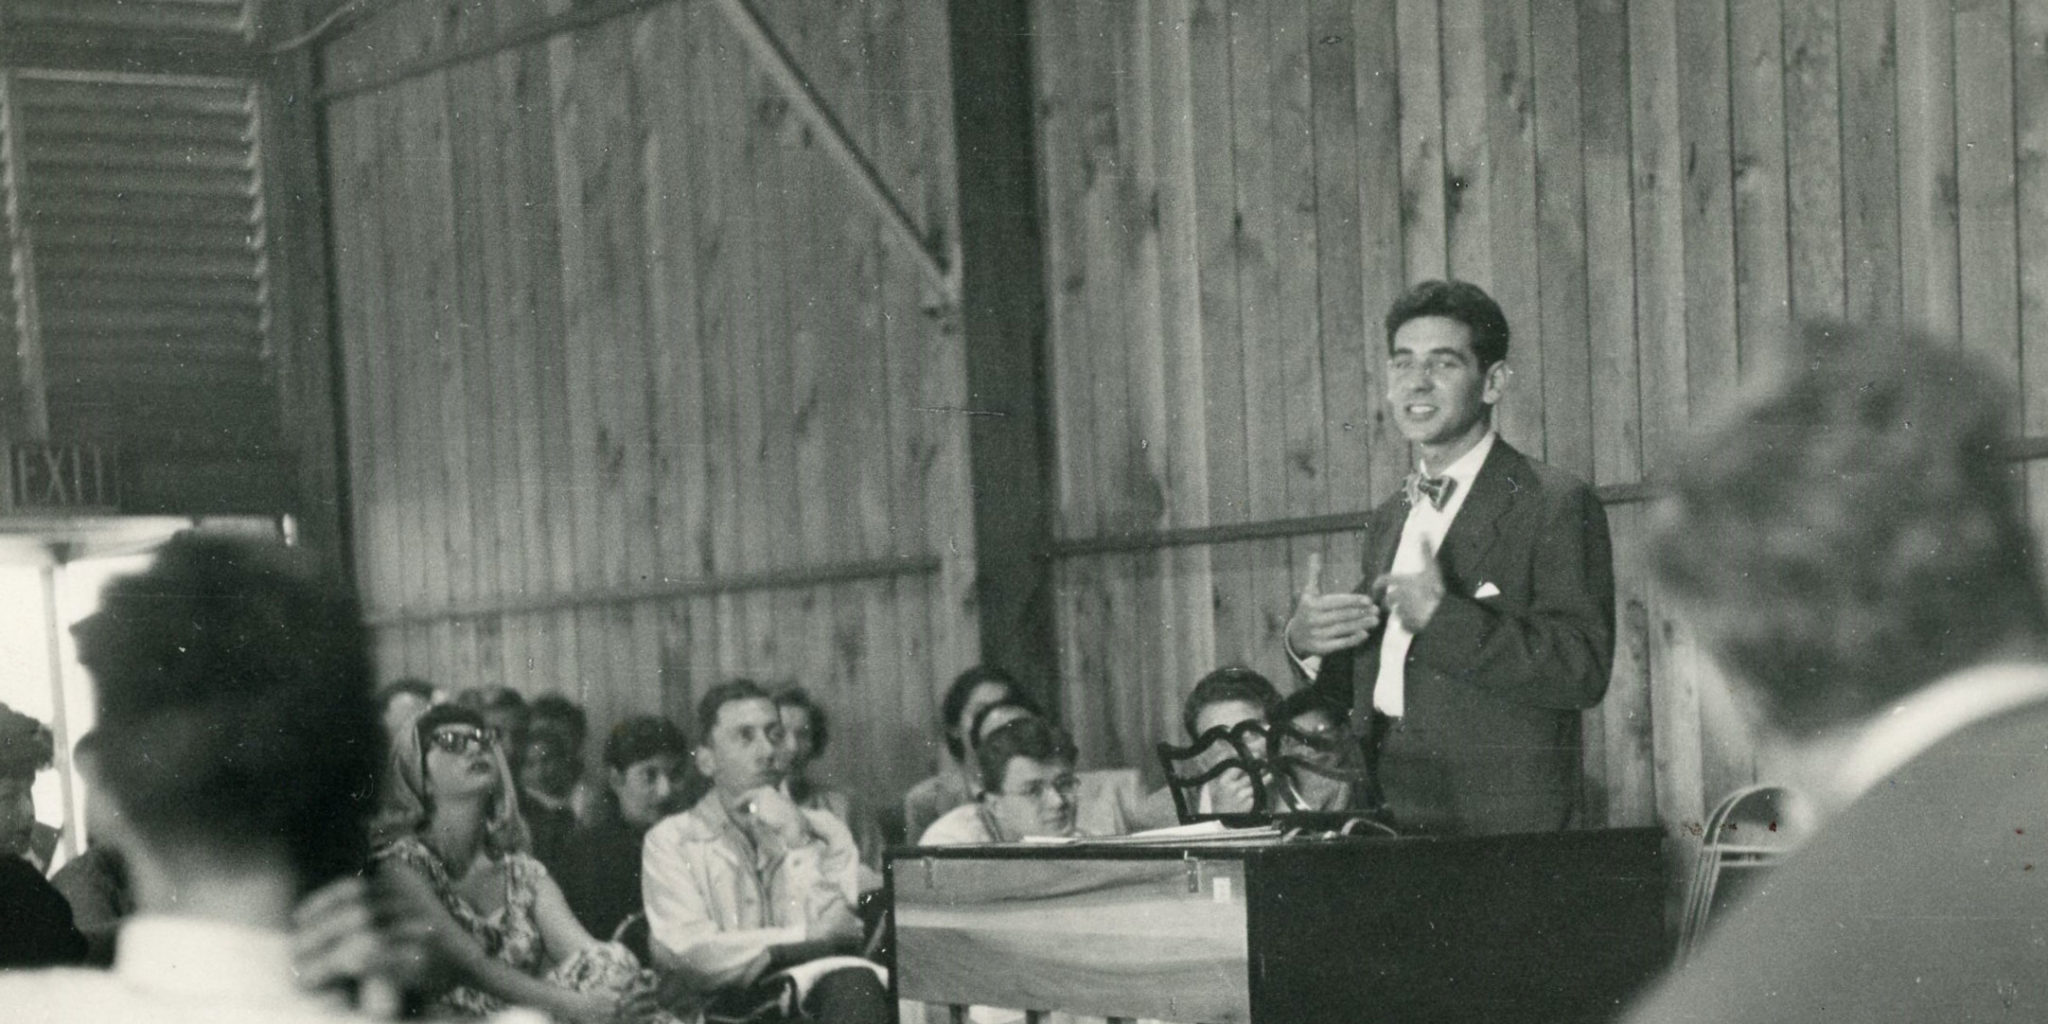 Leonard Bernstein teaching at Tanglewood. (Copyright: Ruth Orkin Photo Archive. Used by permission, courtesy of Mary Engel. All rights reserved.)